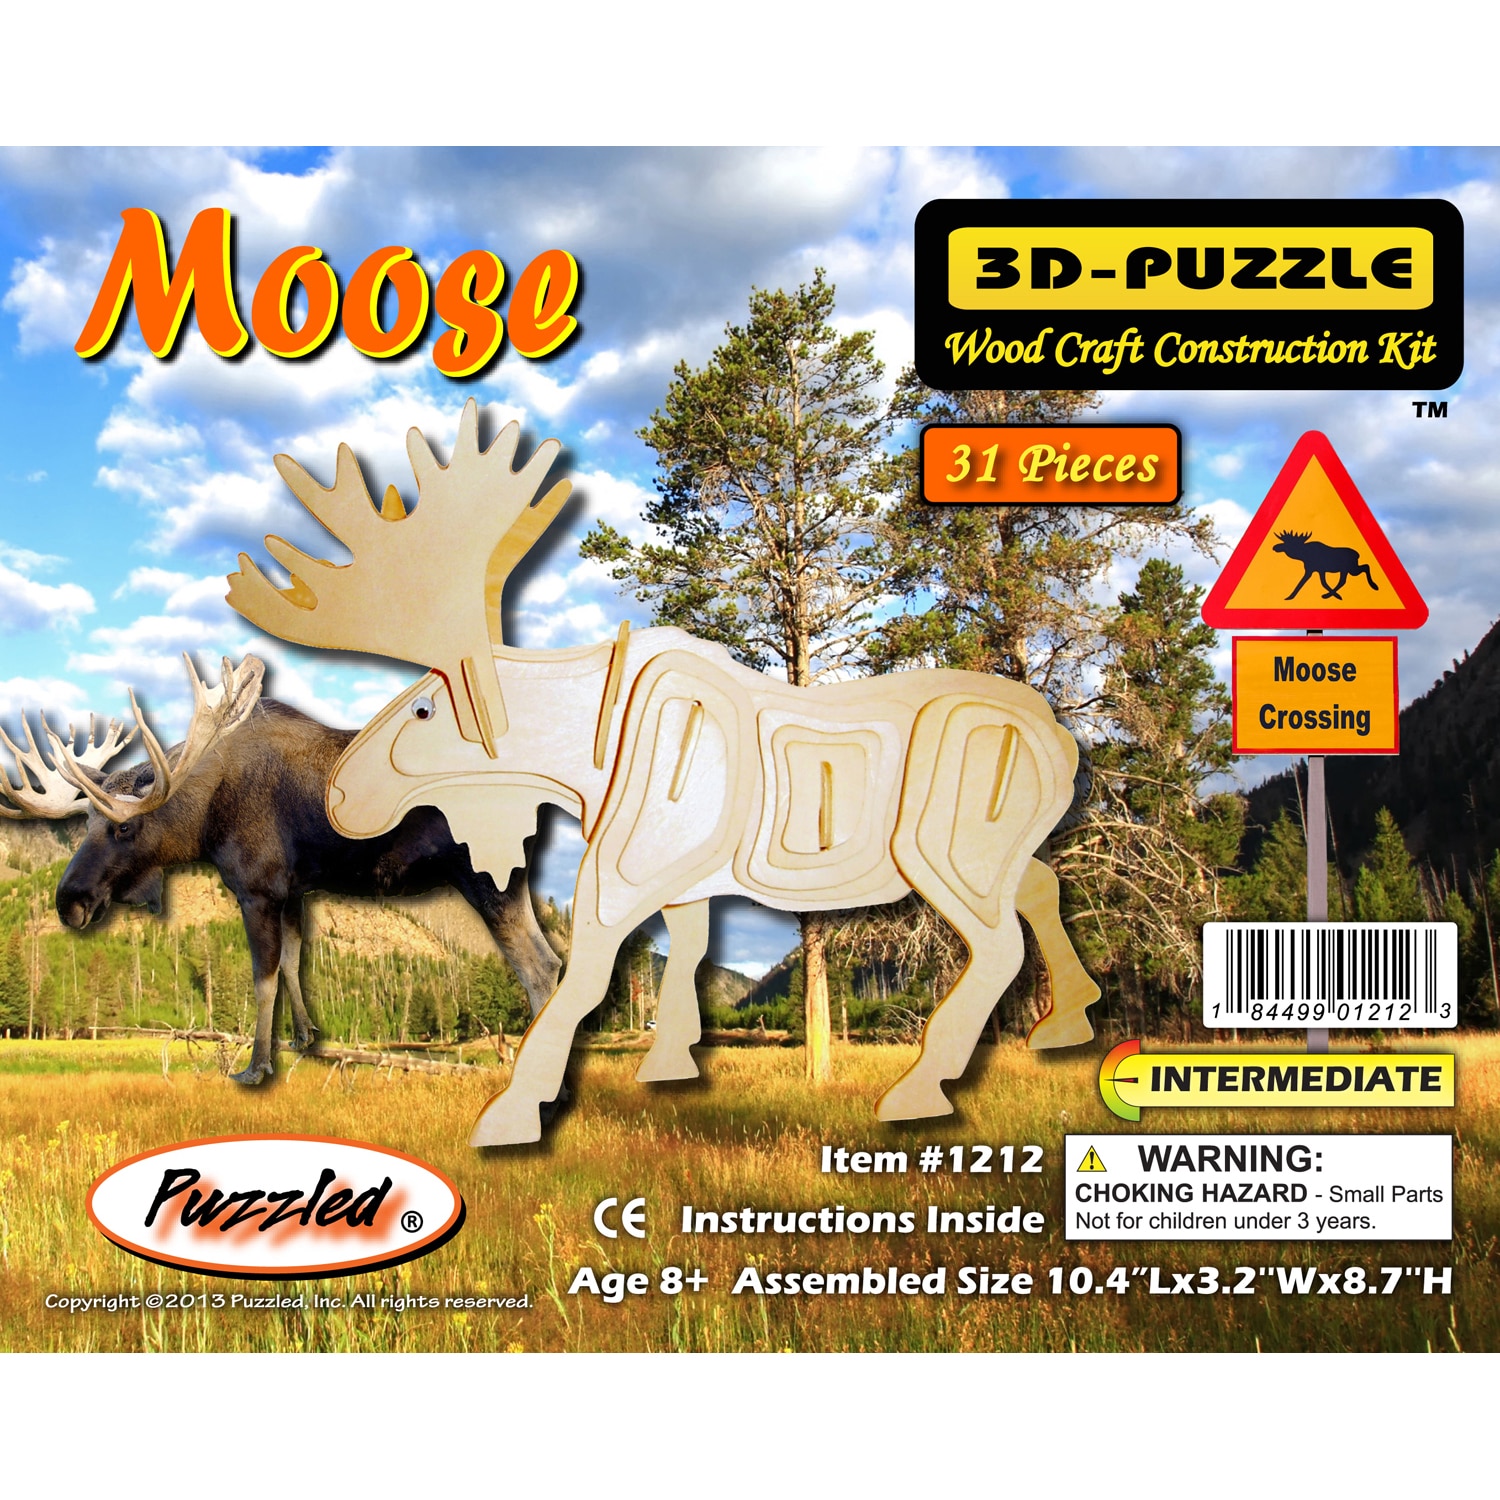 be puzzled 3d puzzles